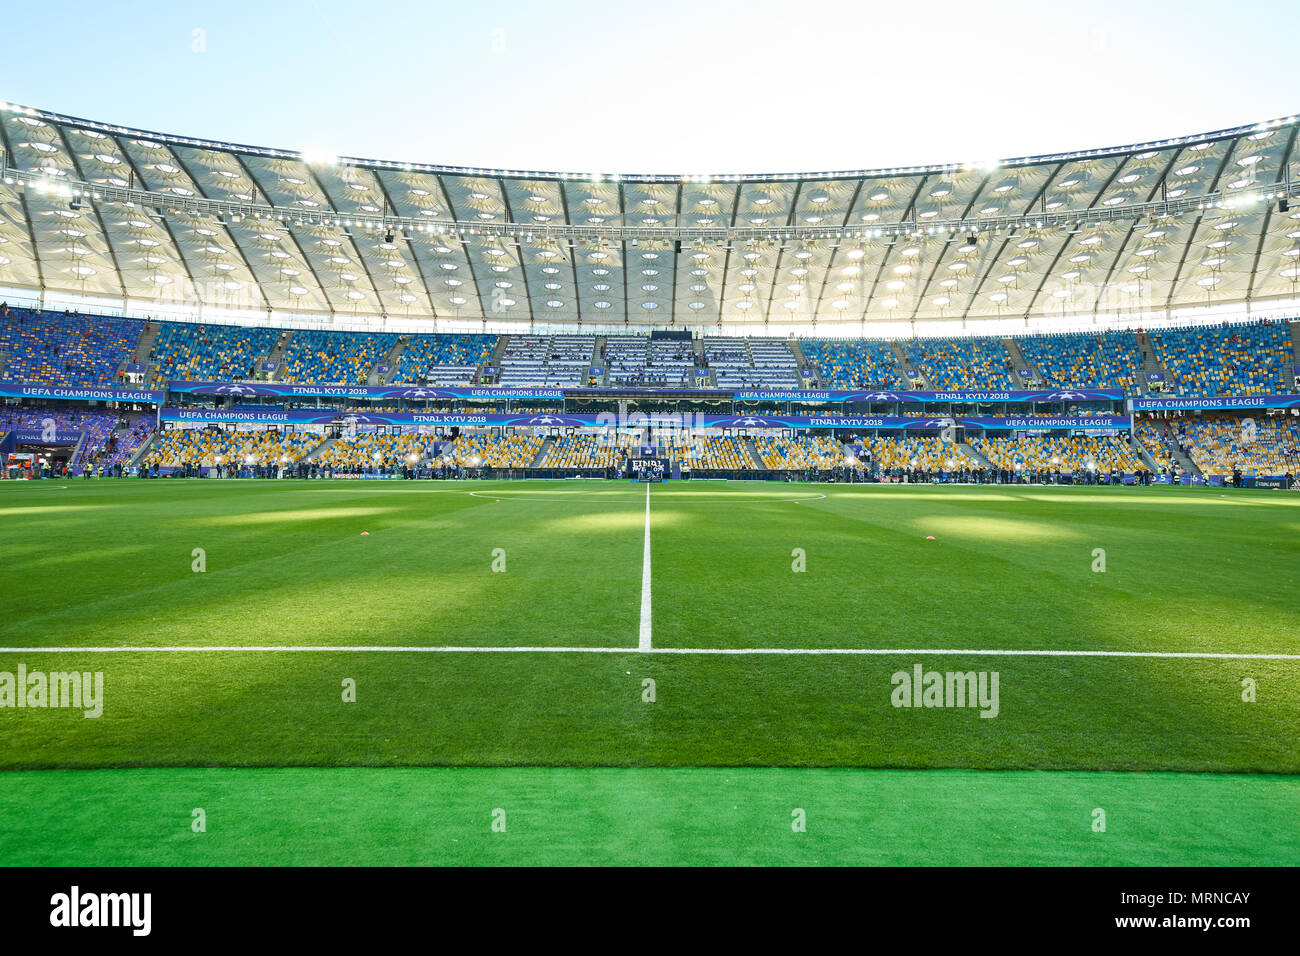 Champions League Final 2018 Stadion High Resolution Stock Photography and  Images - Alamy